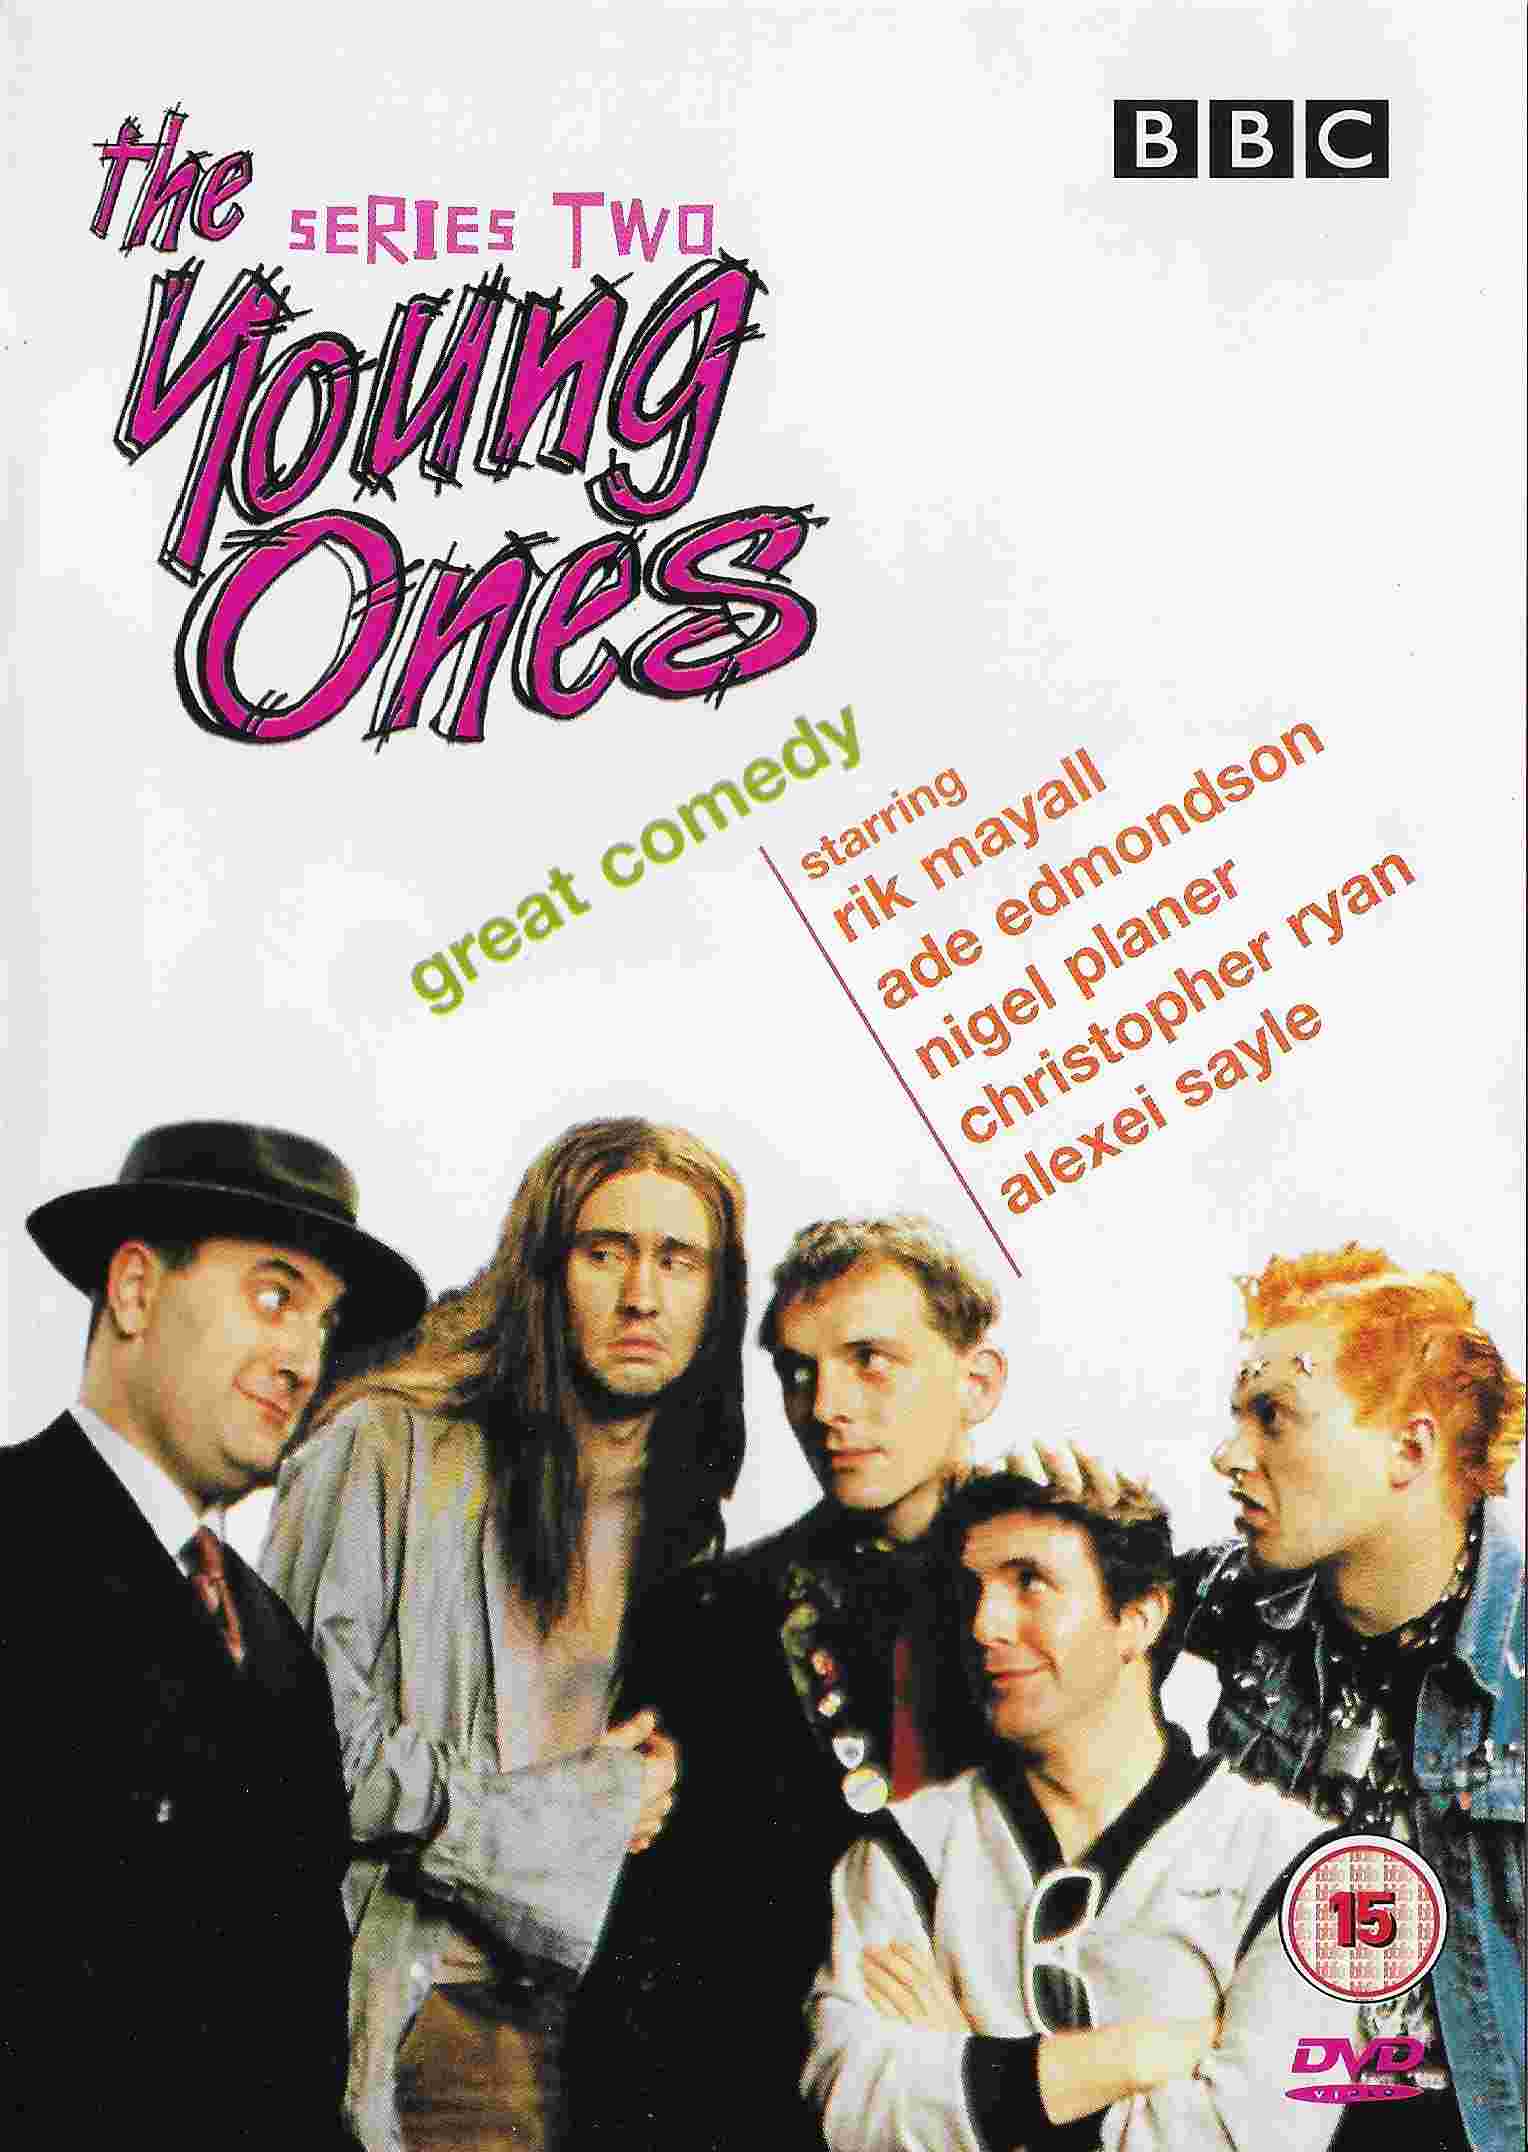 Picture of BBCDVD 1171 The young ones - Series 2 by artist Ben Elton / Rik Mayall / Lise Mayer / Alexei Sayle from the BBC dvds - Records and Tapes library